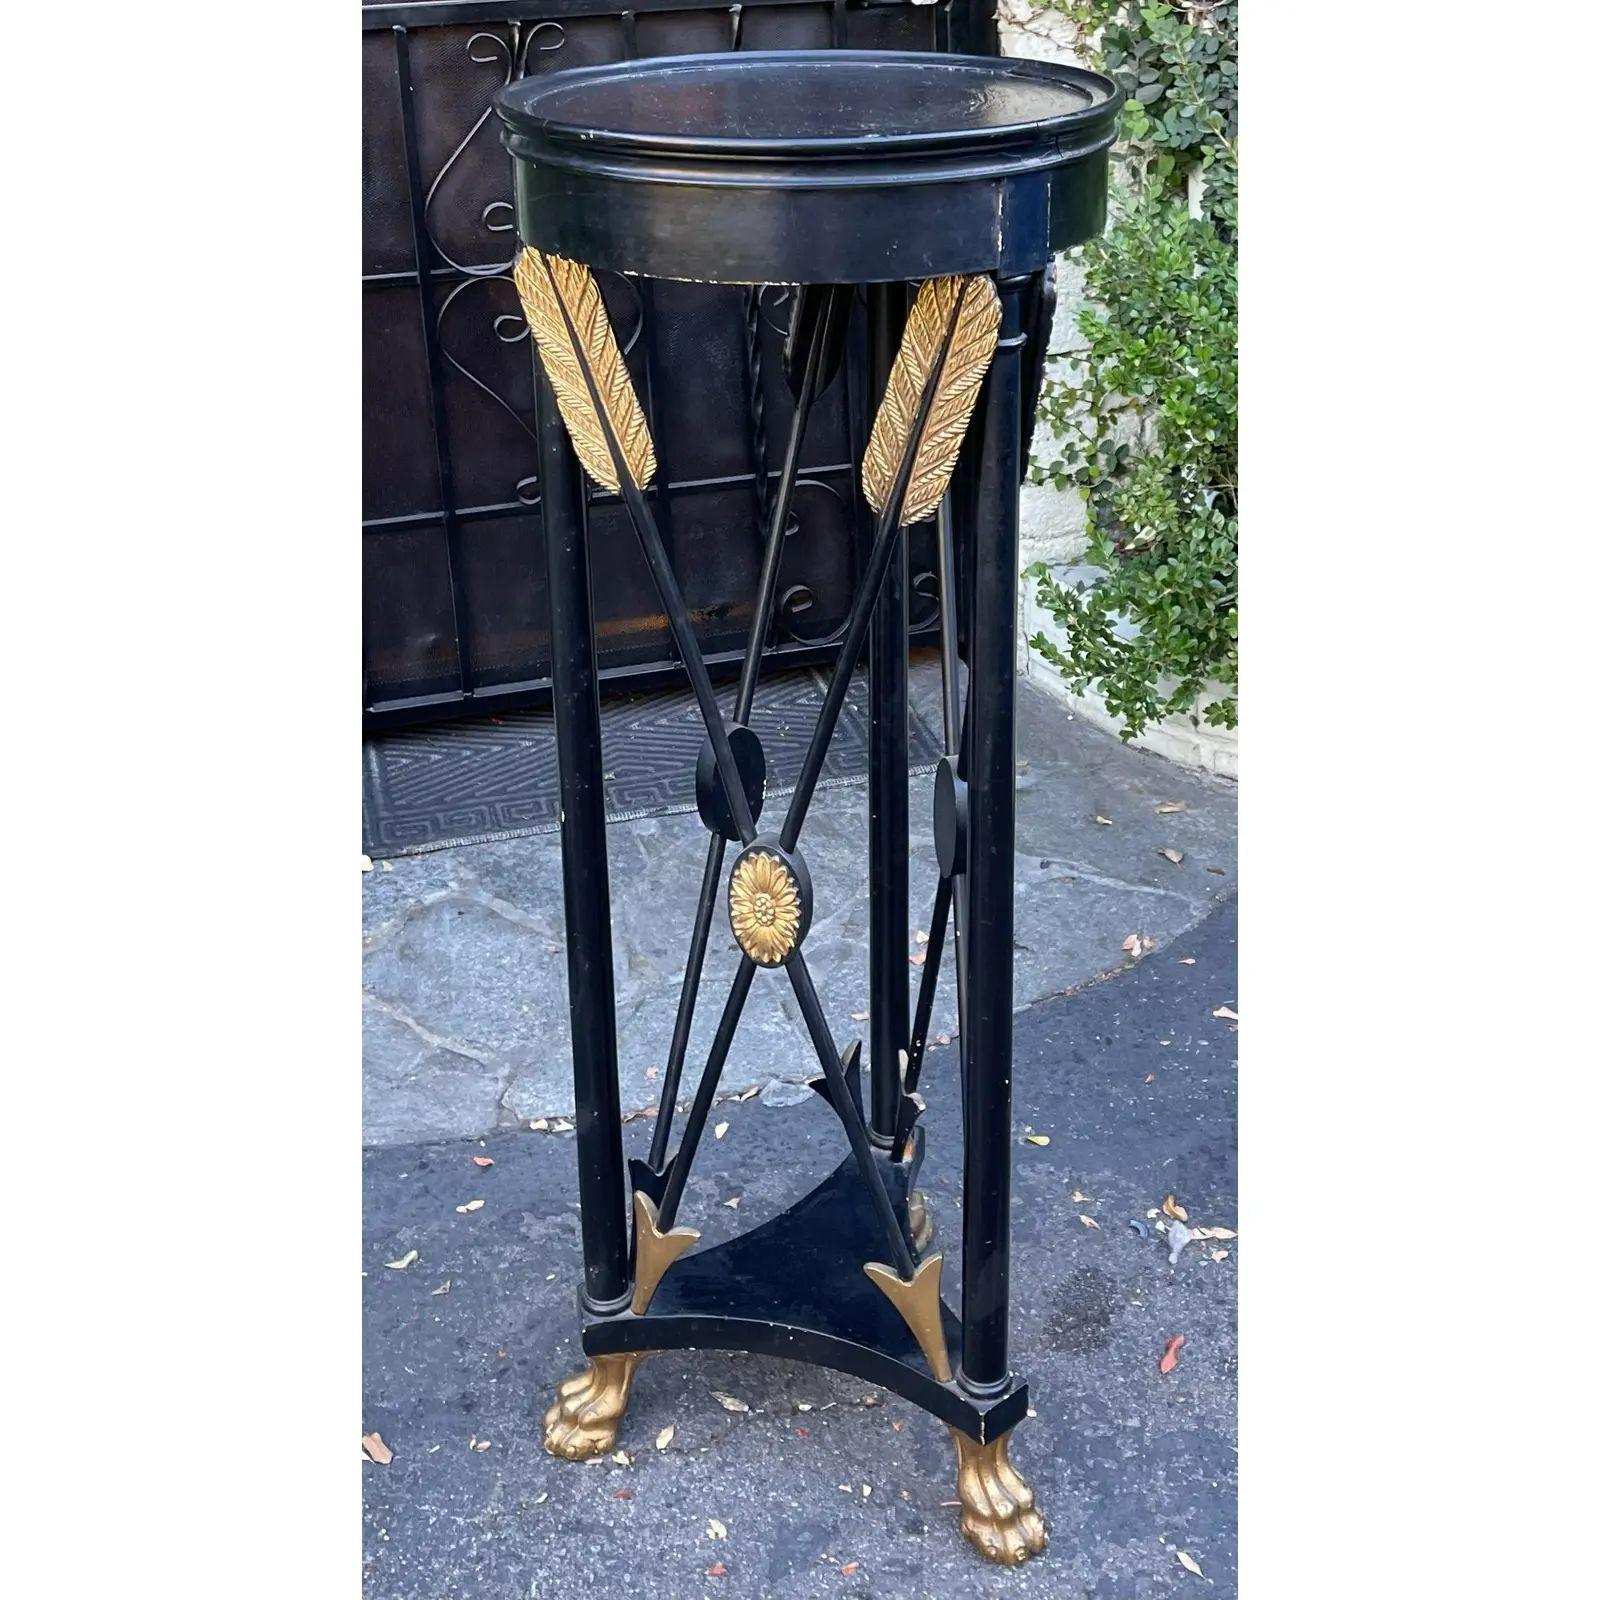 Antique French Empire Style Black & Gold Giltwood Pedestal Plant Stand. It features a well worn paint decorated finish and giltwood details including paw feet and empire style crossed arrows.

Additional information: 
Materials: Giltwood
Color: